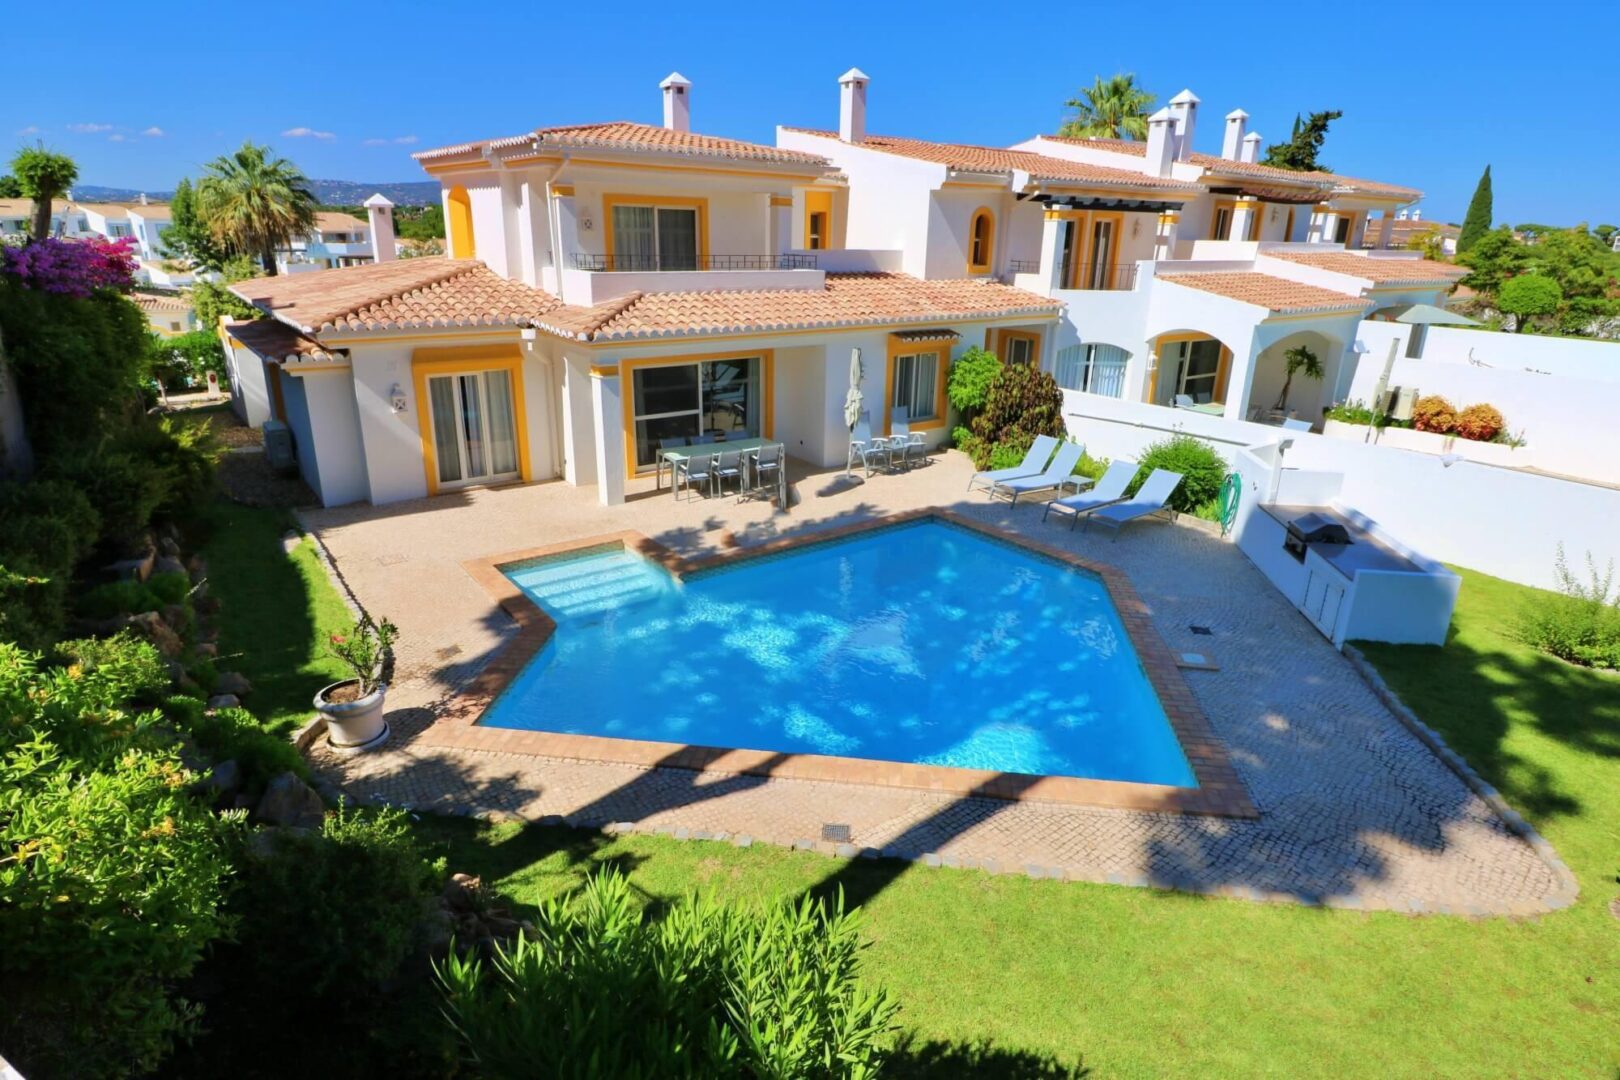 Two Bedroom + Study Villa with Pool